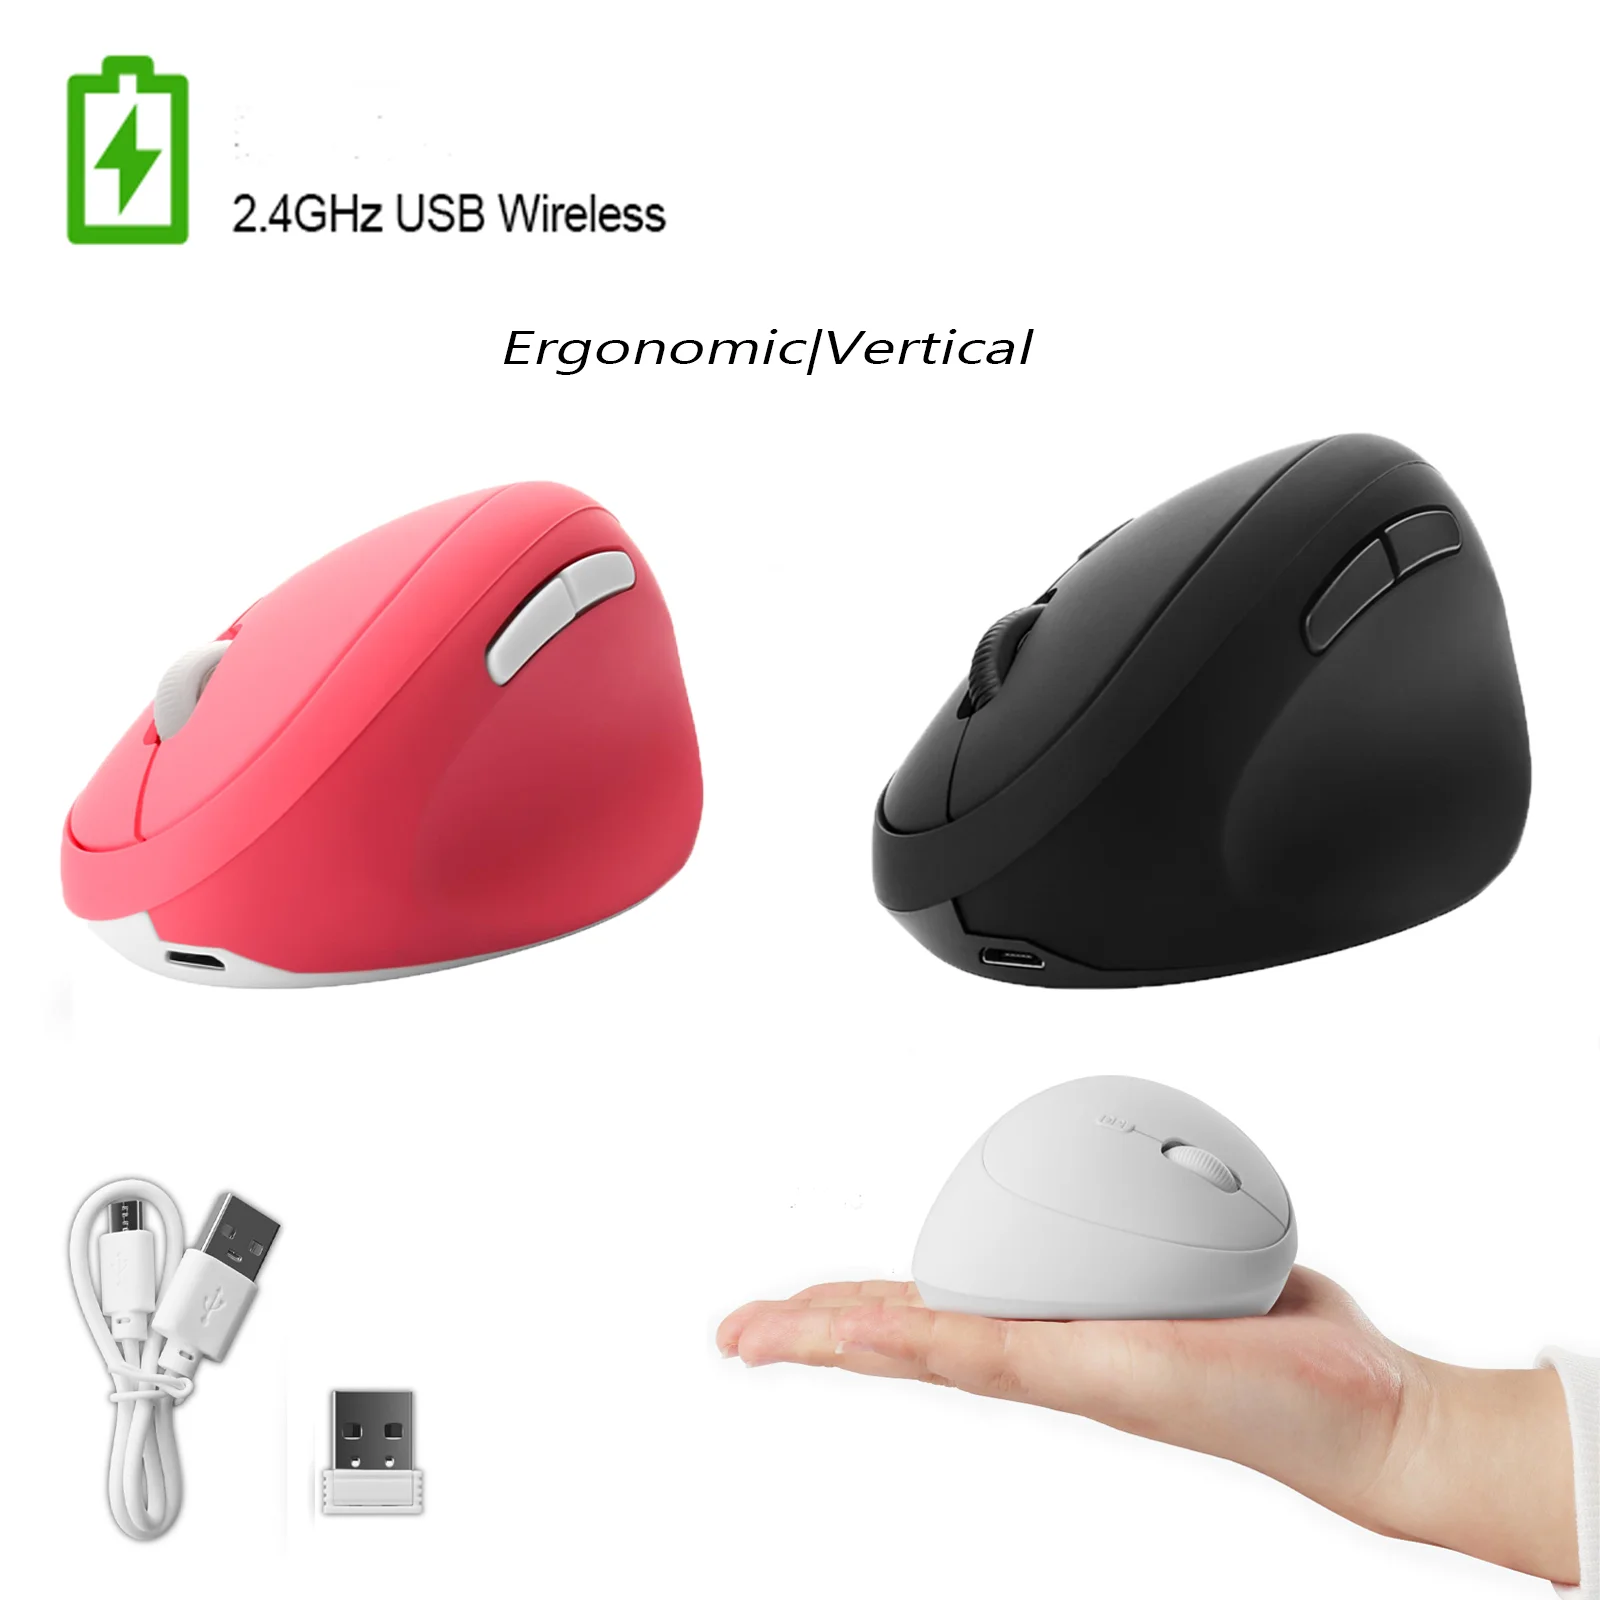 Rechargeable Ergonomic Vertical Mouse 2.4G Wireless Optical USB Mice Mini Computer Gaming Mause For Laptop PC Tablet Small Hand